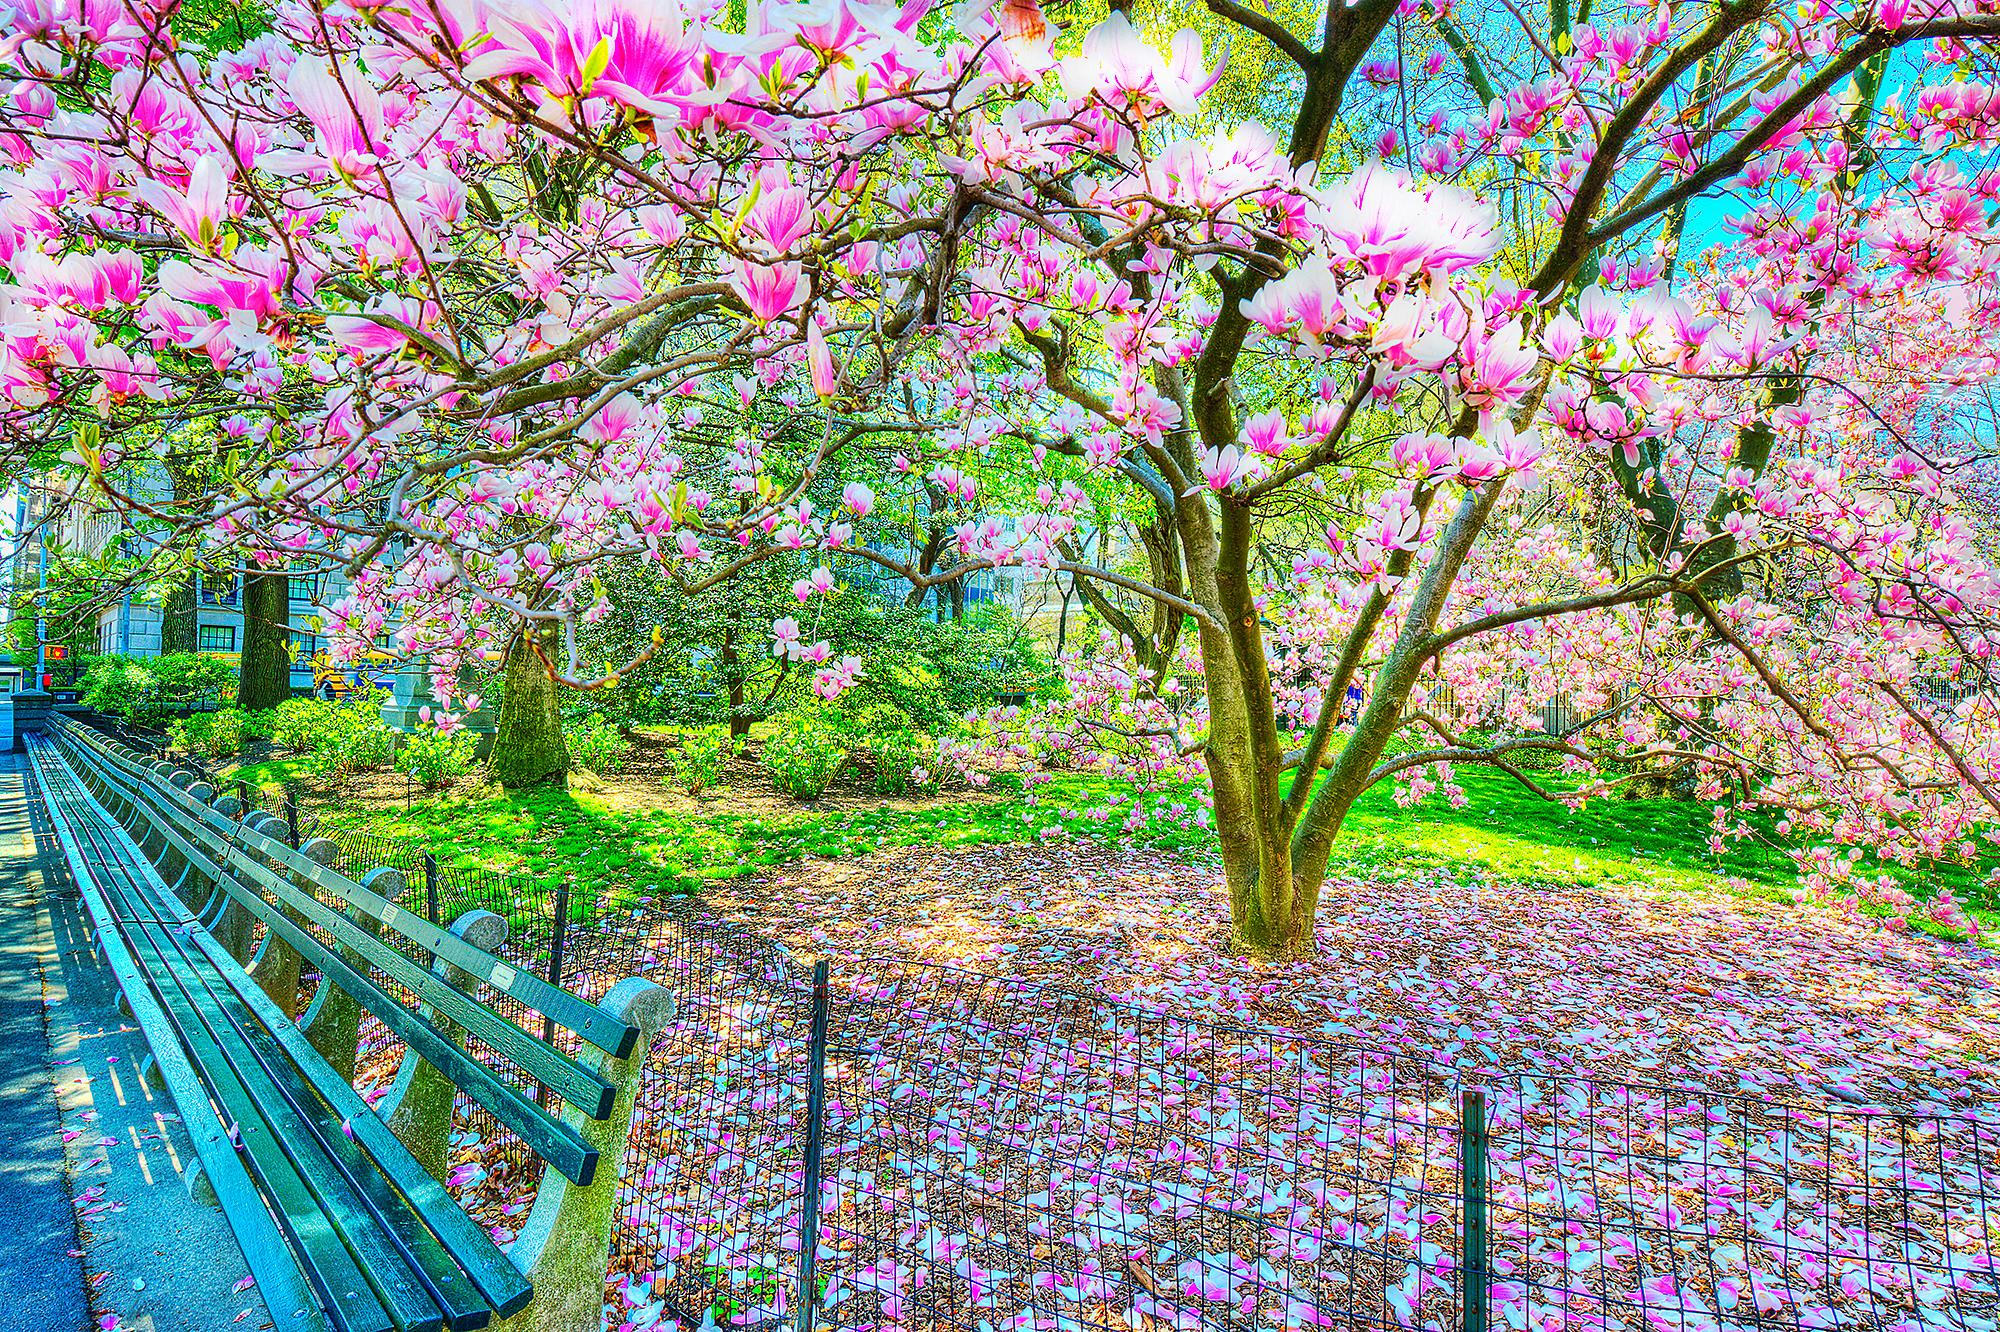 Mitchell Funk Landscape Photograph - Blooming Magnolia Tree In Spring, Central Park  New York City in Pinks and Blues